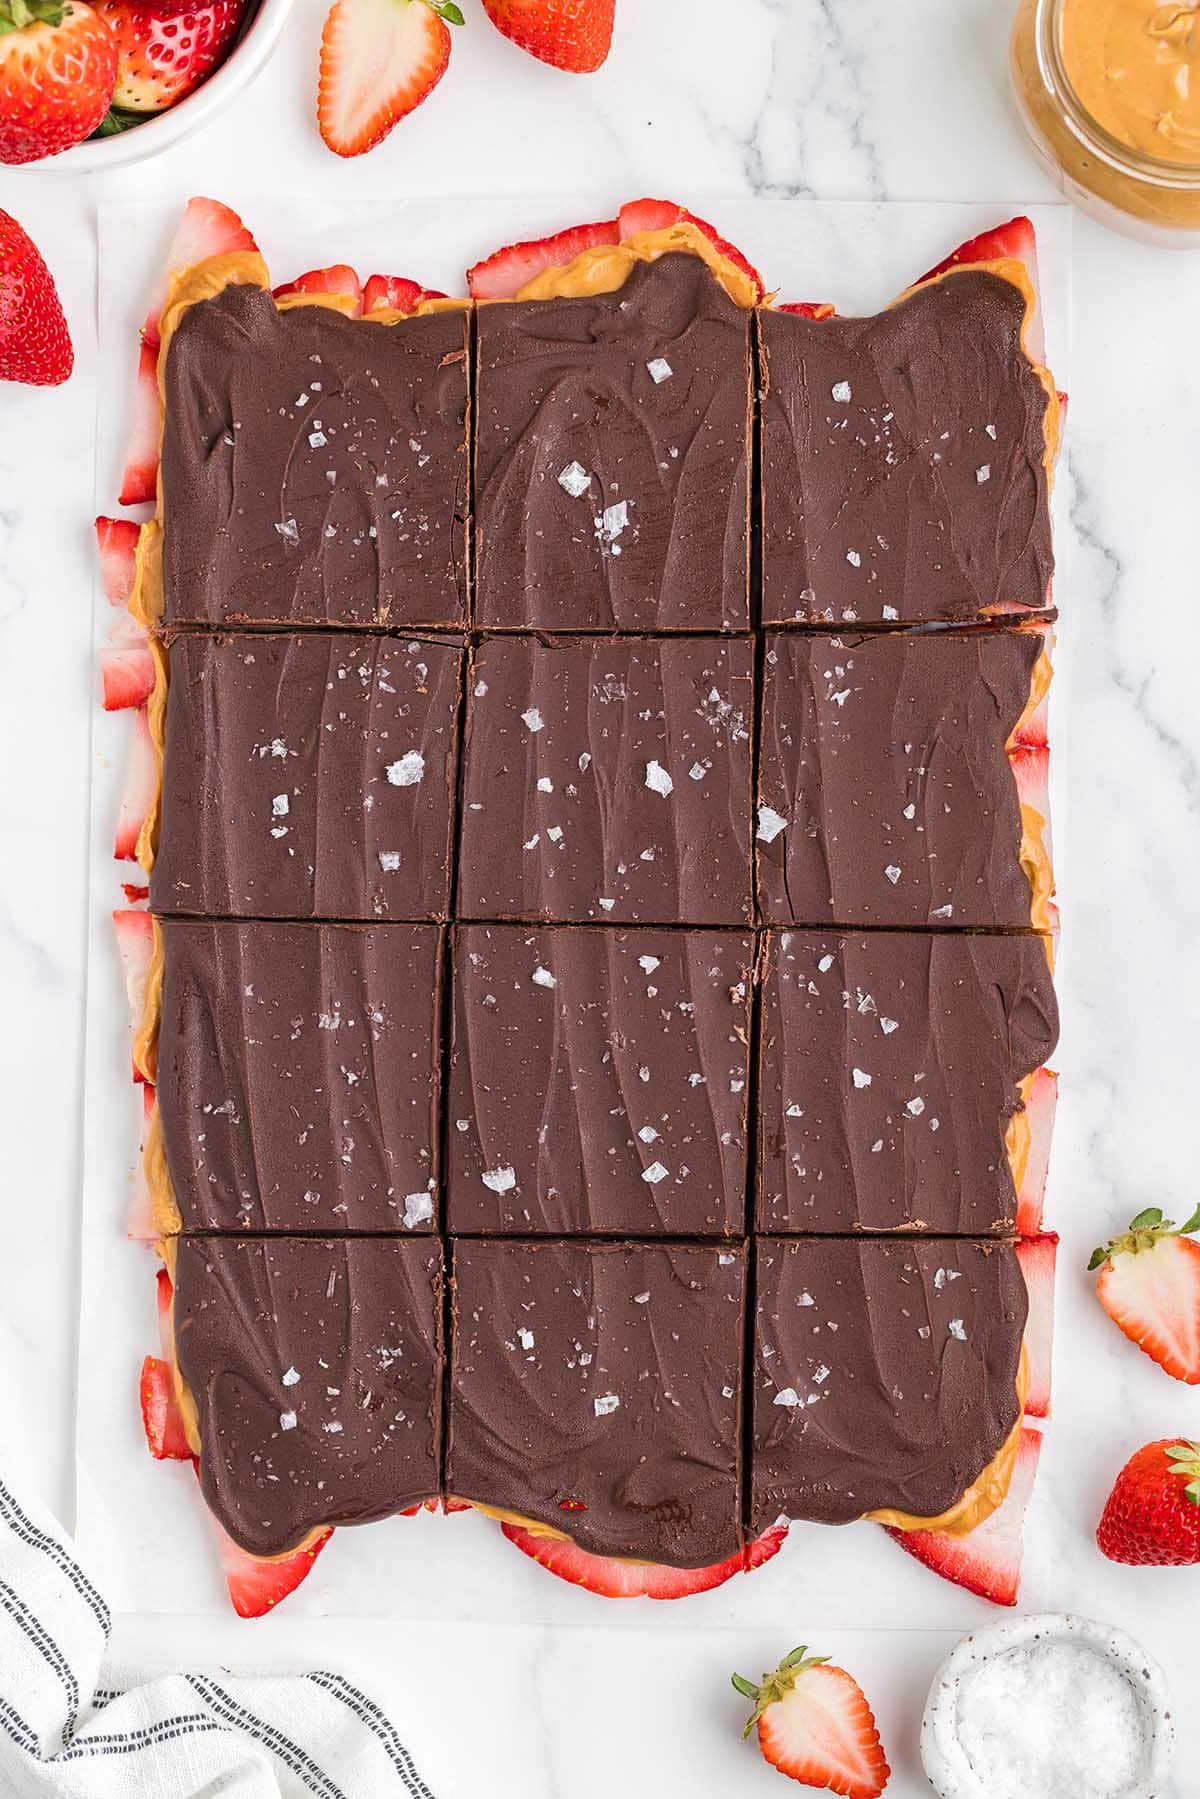 Strawberry Peanut Butter Bark cut into squares.